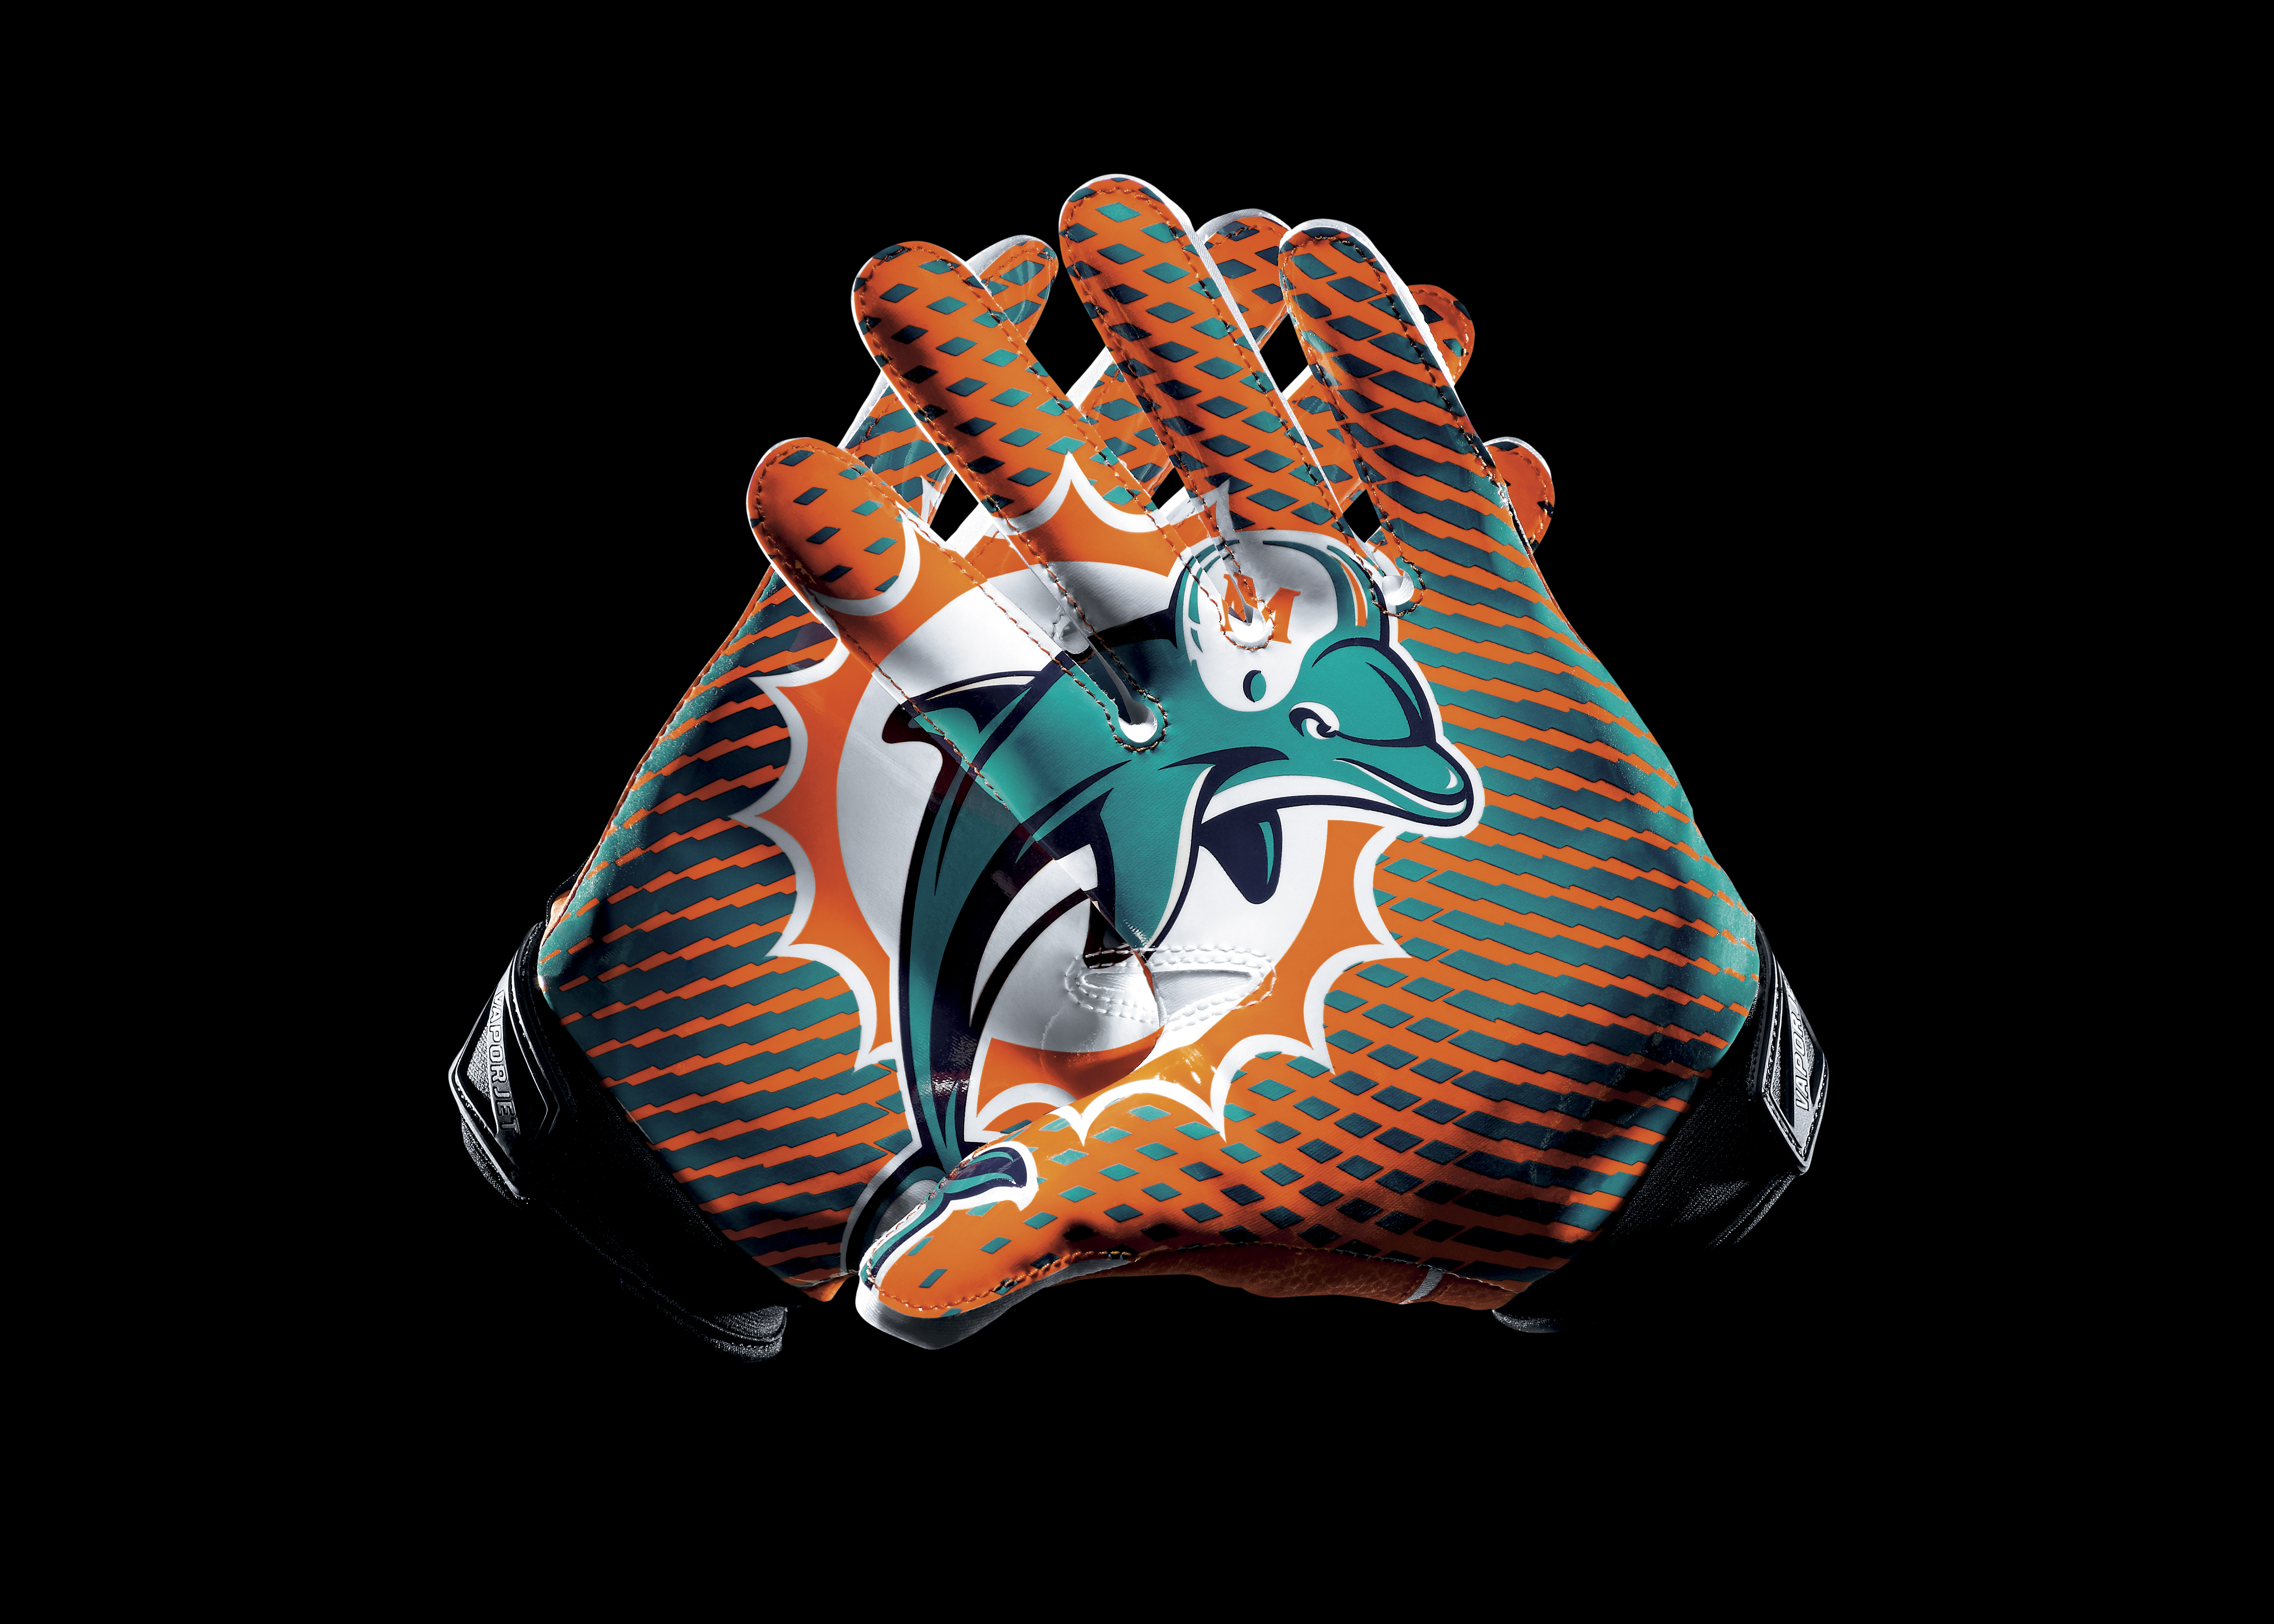 Miami Dolphins Wallpaper And Screensavers 8fv1849 Picserio